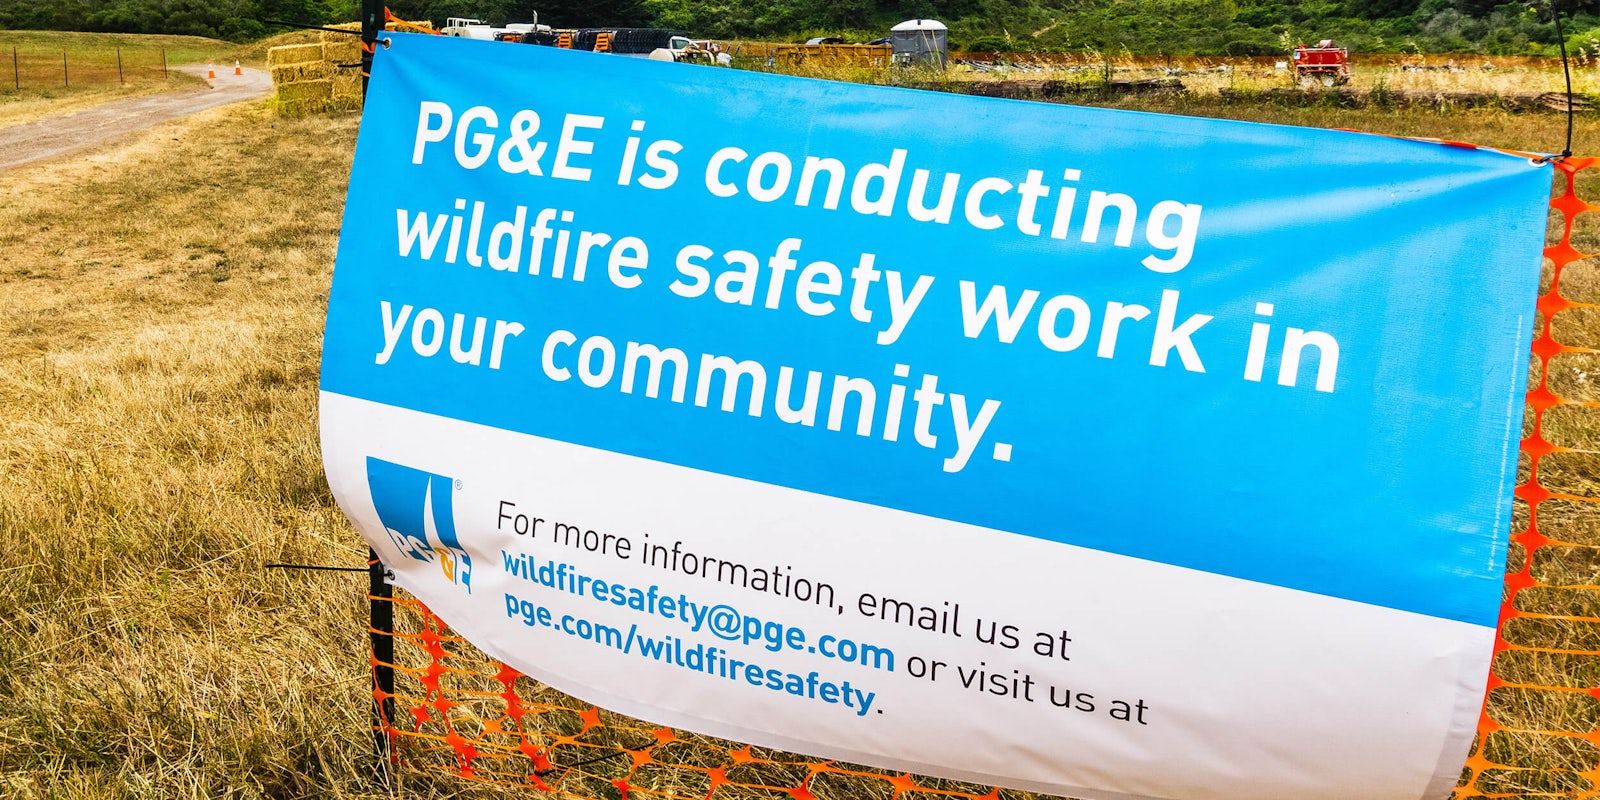 'pg&e is conducting wildfire safety work in your community' sign on construction fencing